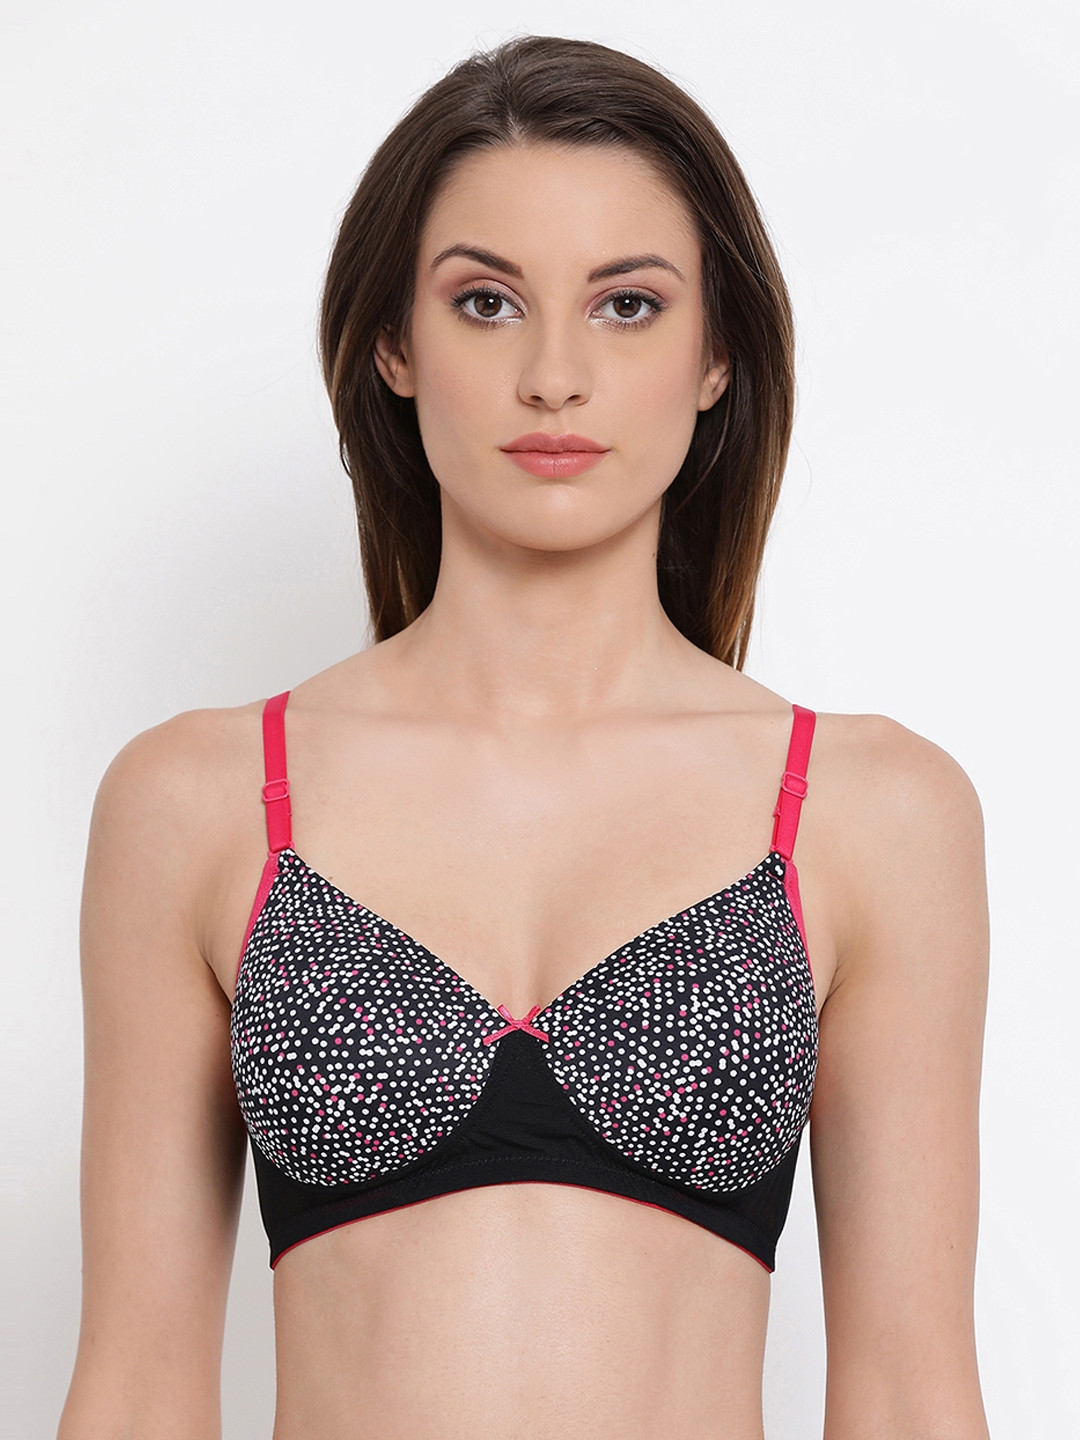 Buy Padded Non-Wired Full Cup Polka Dot Print Multiway T-shirt Bra